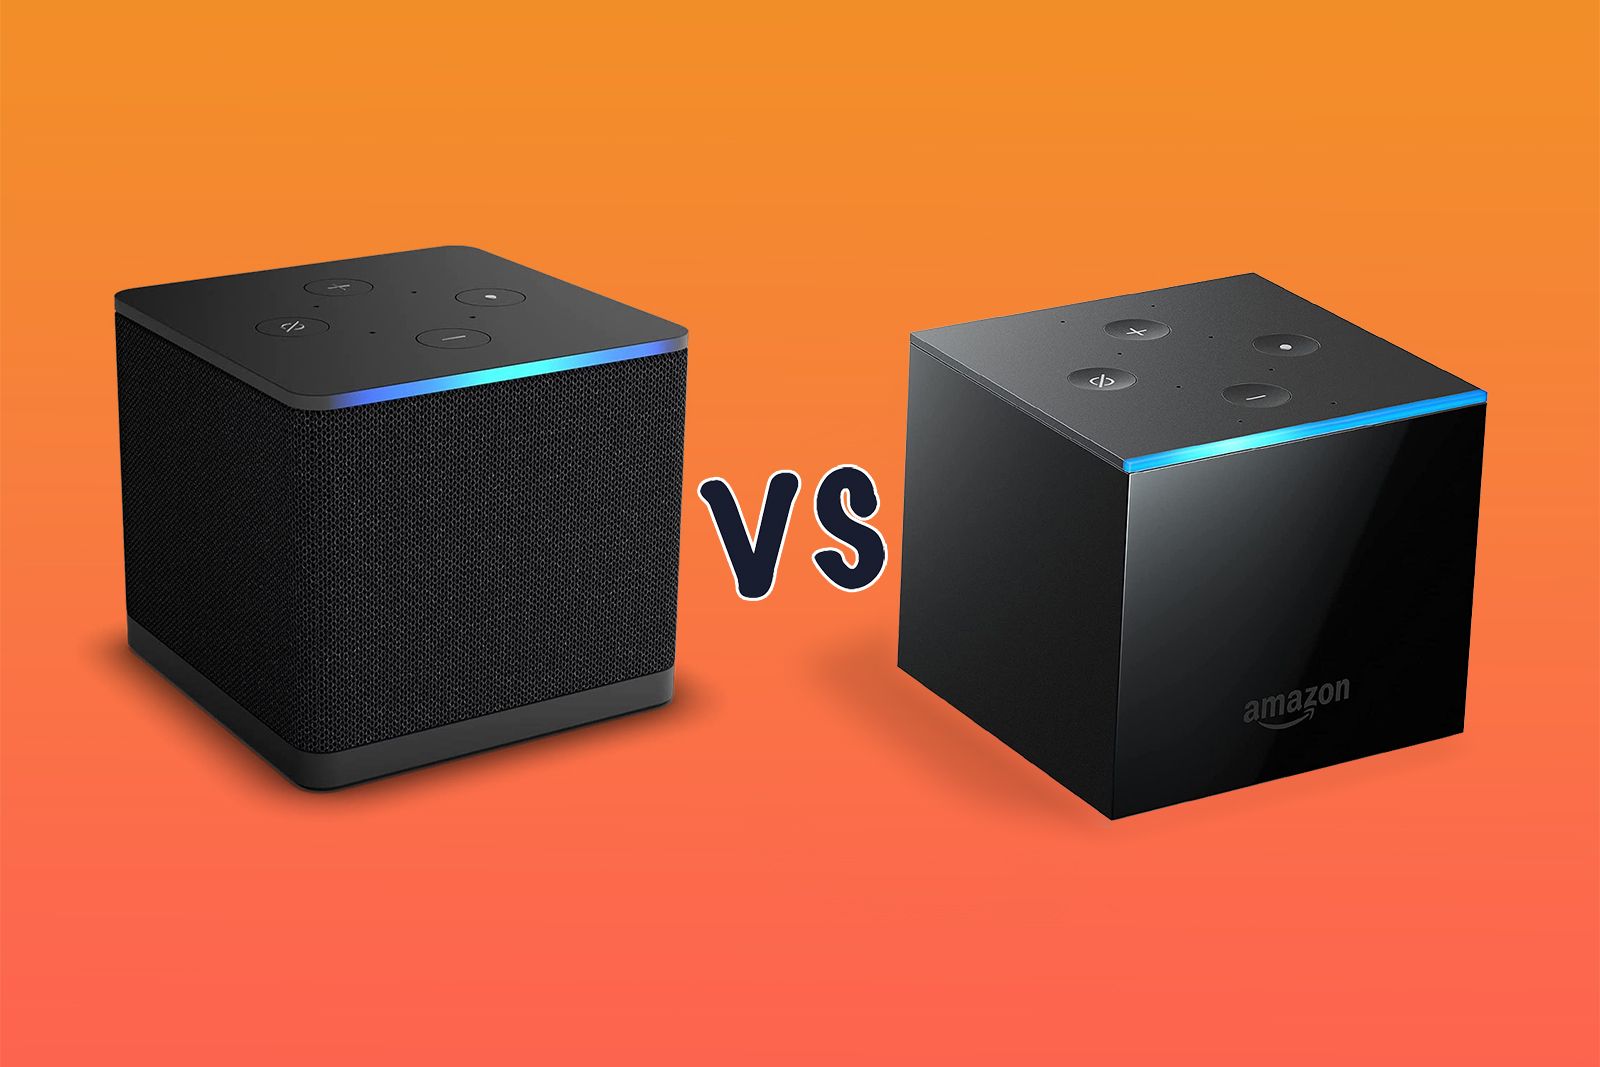 Fire TV Cube: What It Is and How It Works